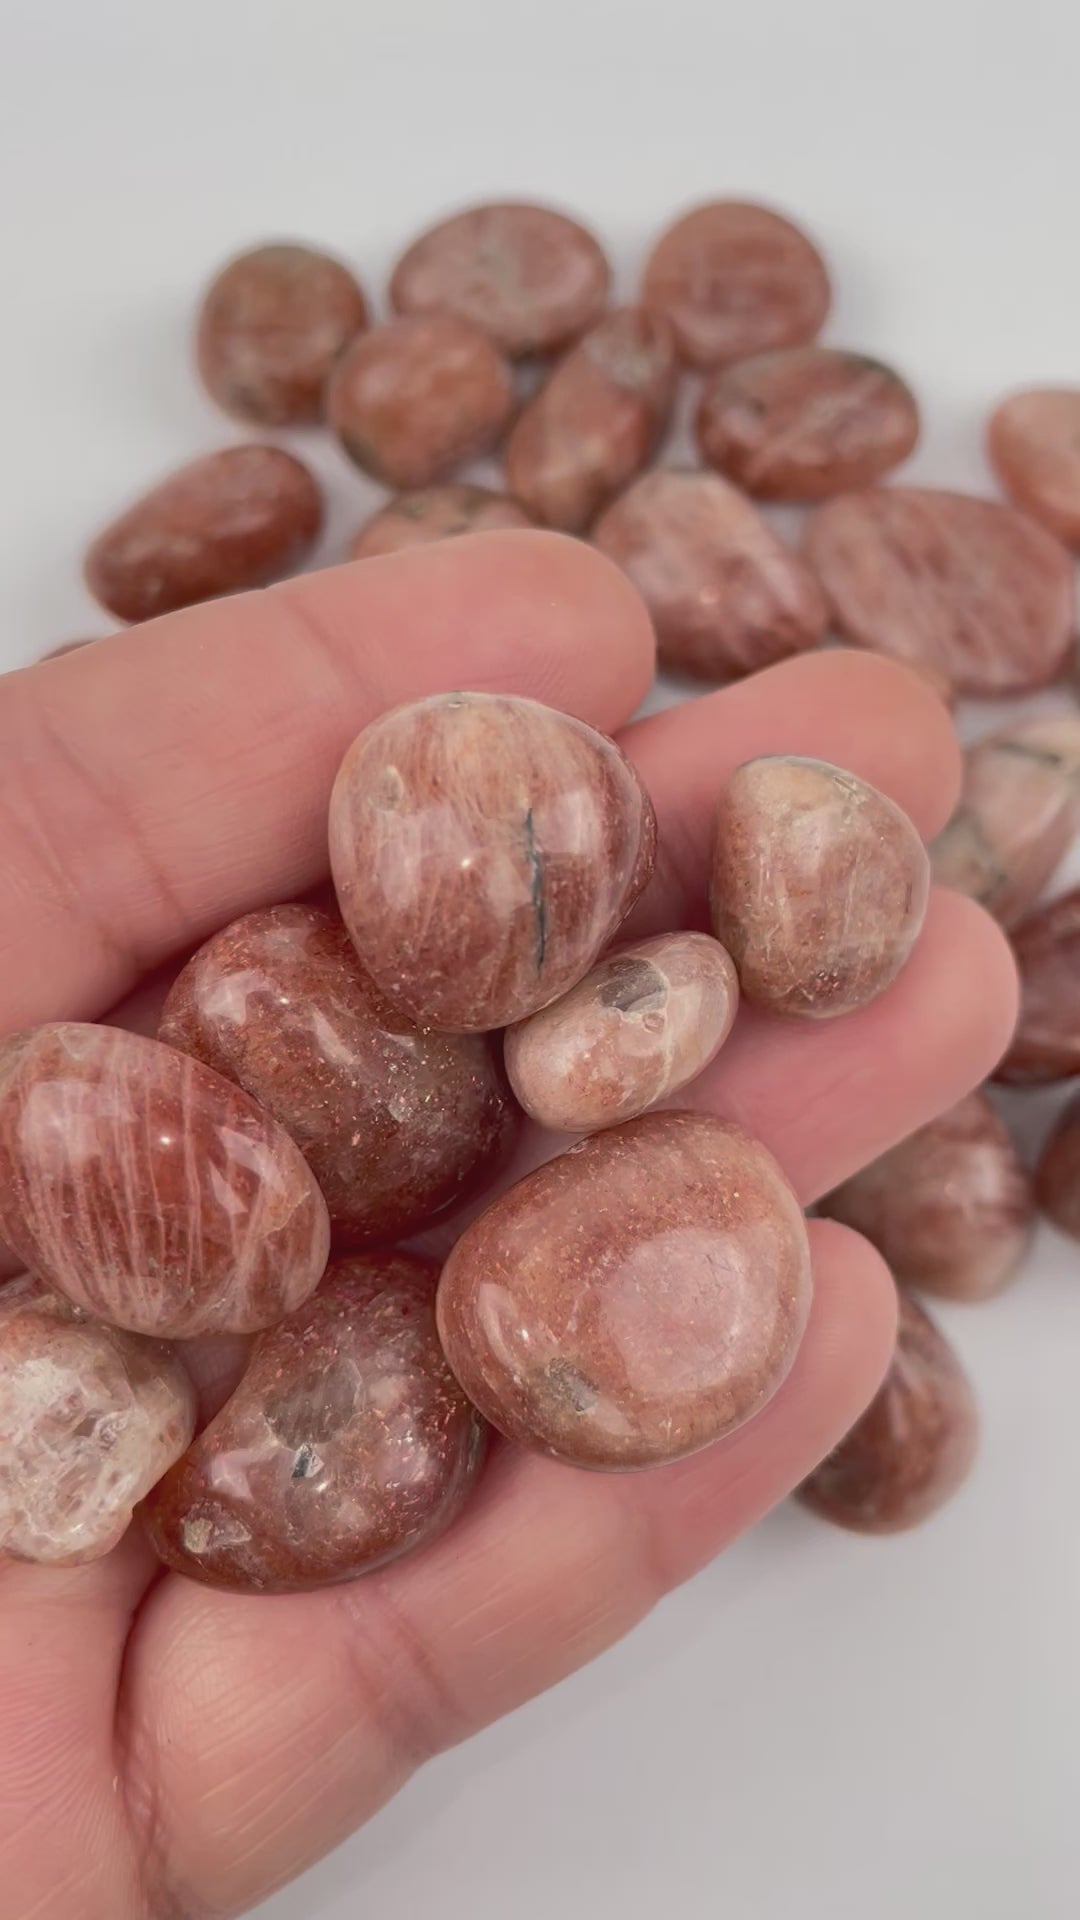 Video showing the sunstone tumbled stones